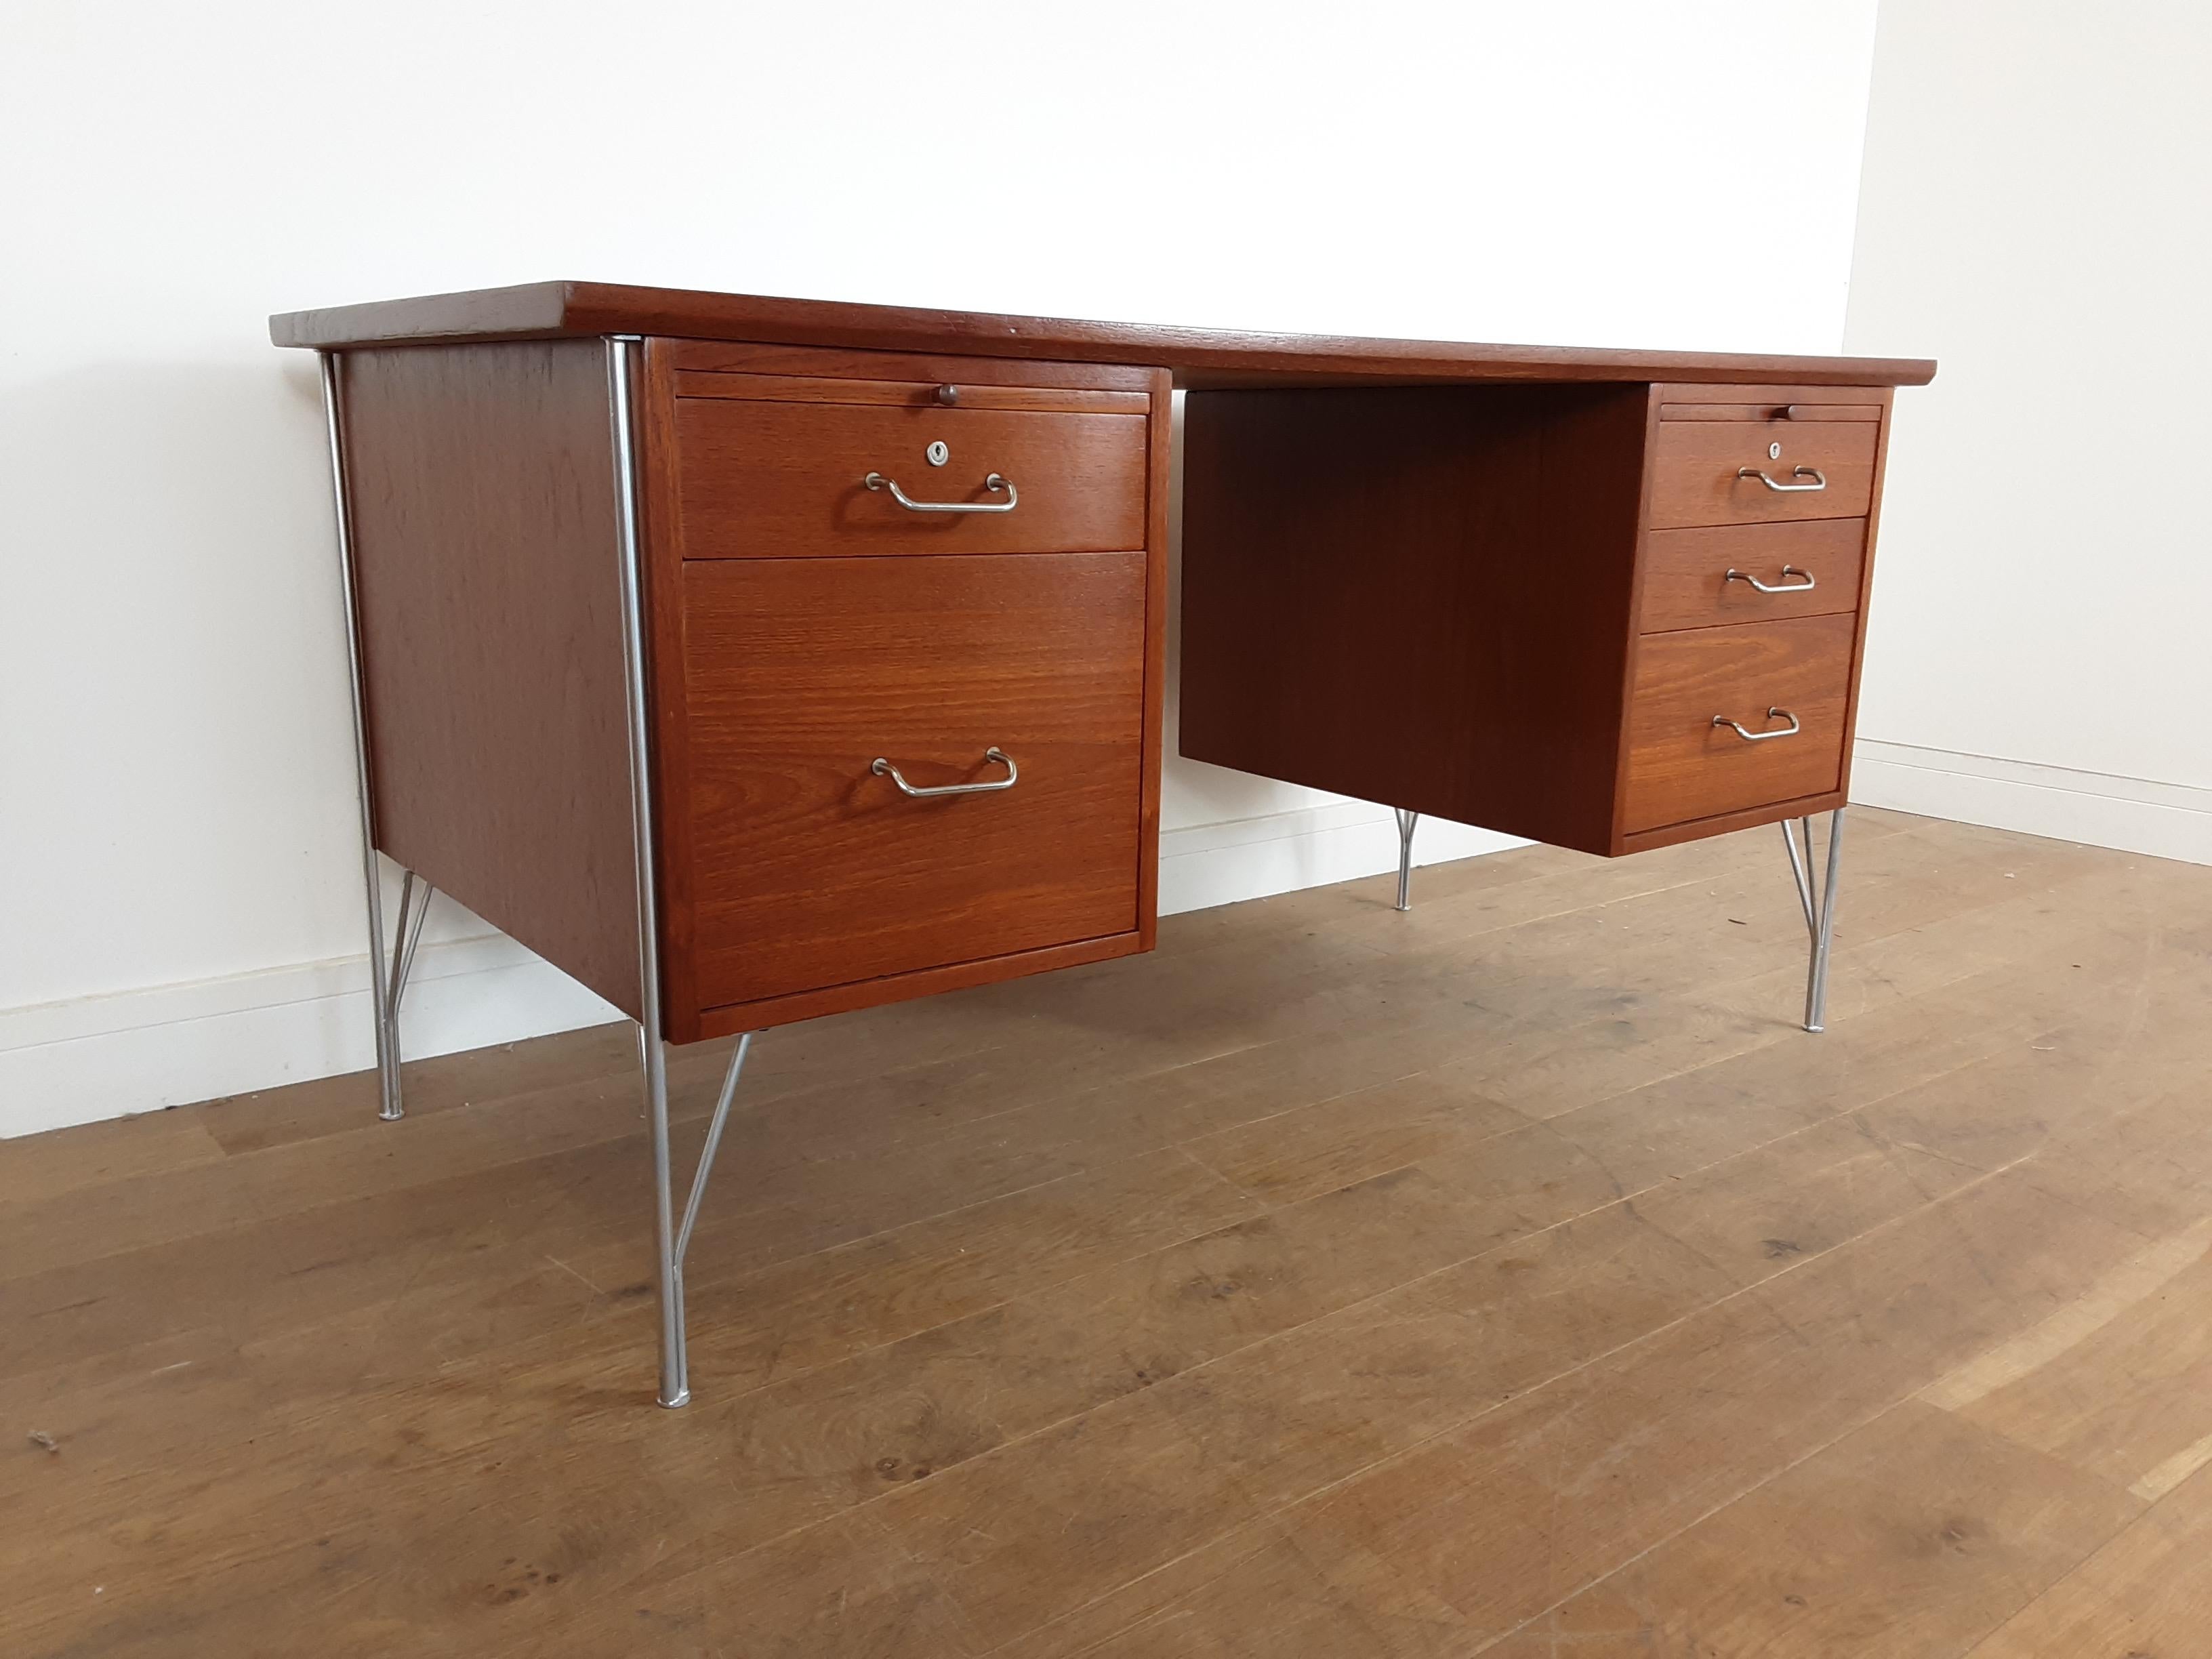 British Midcentury Teak Desk Designed by John and Sylvia Reid for Stag Furniture In Good Condition For Sale In London, GB